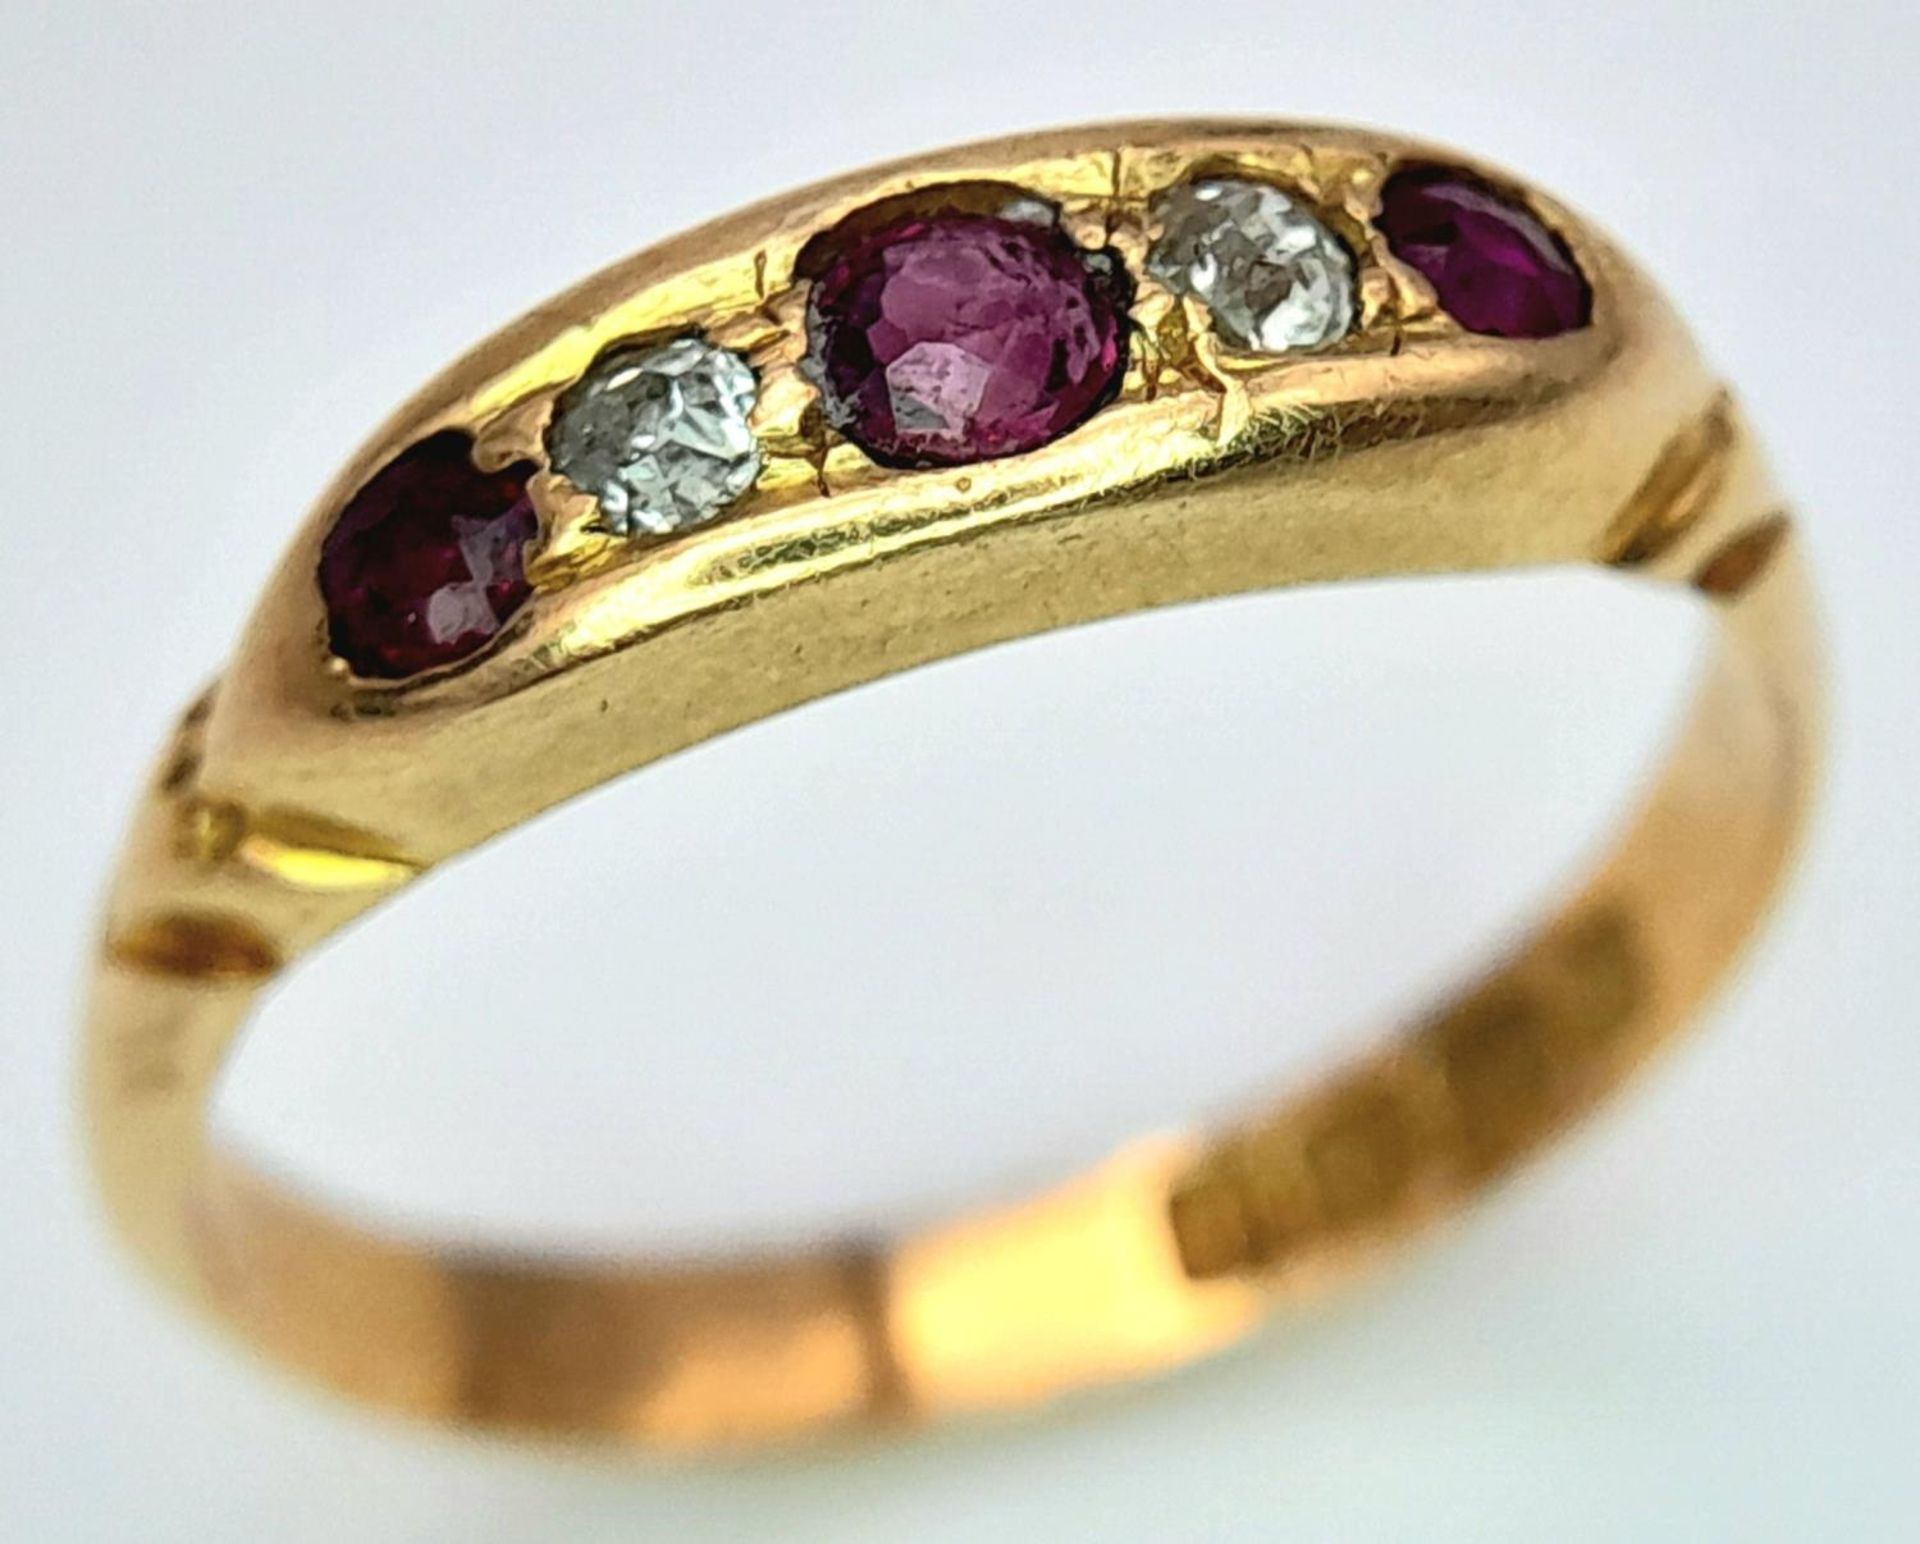 An Antique 18K Yellow Gold Ruby and Diamond Ring. Size K/L, 2.78g total weight. - Image 2 of 5